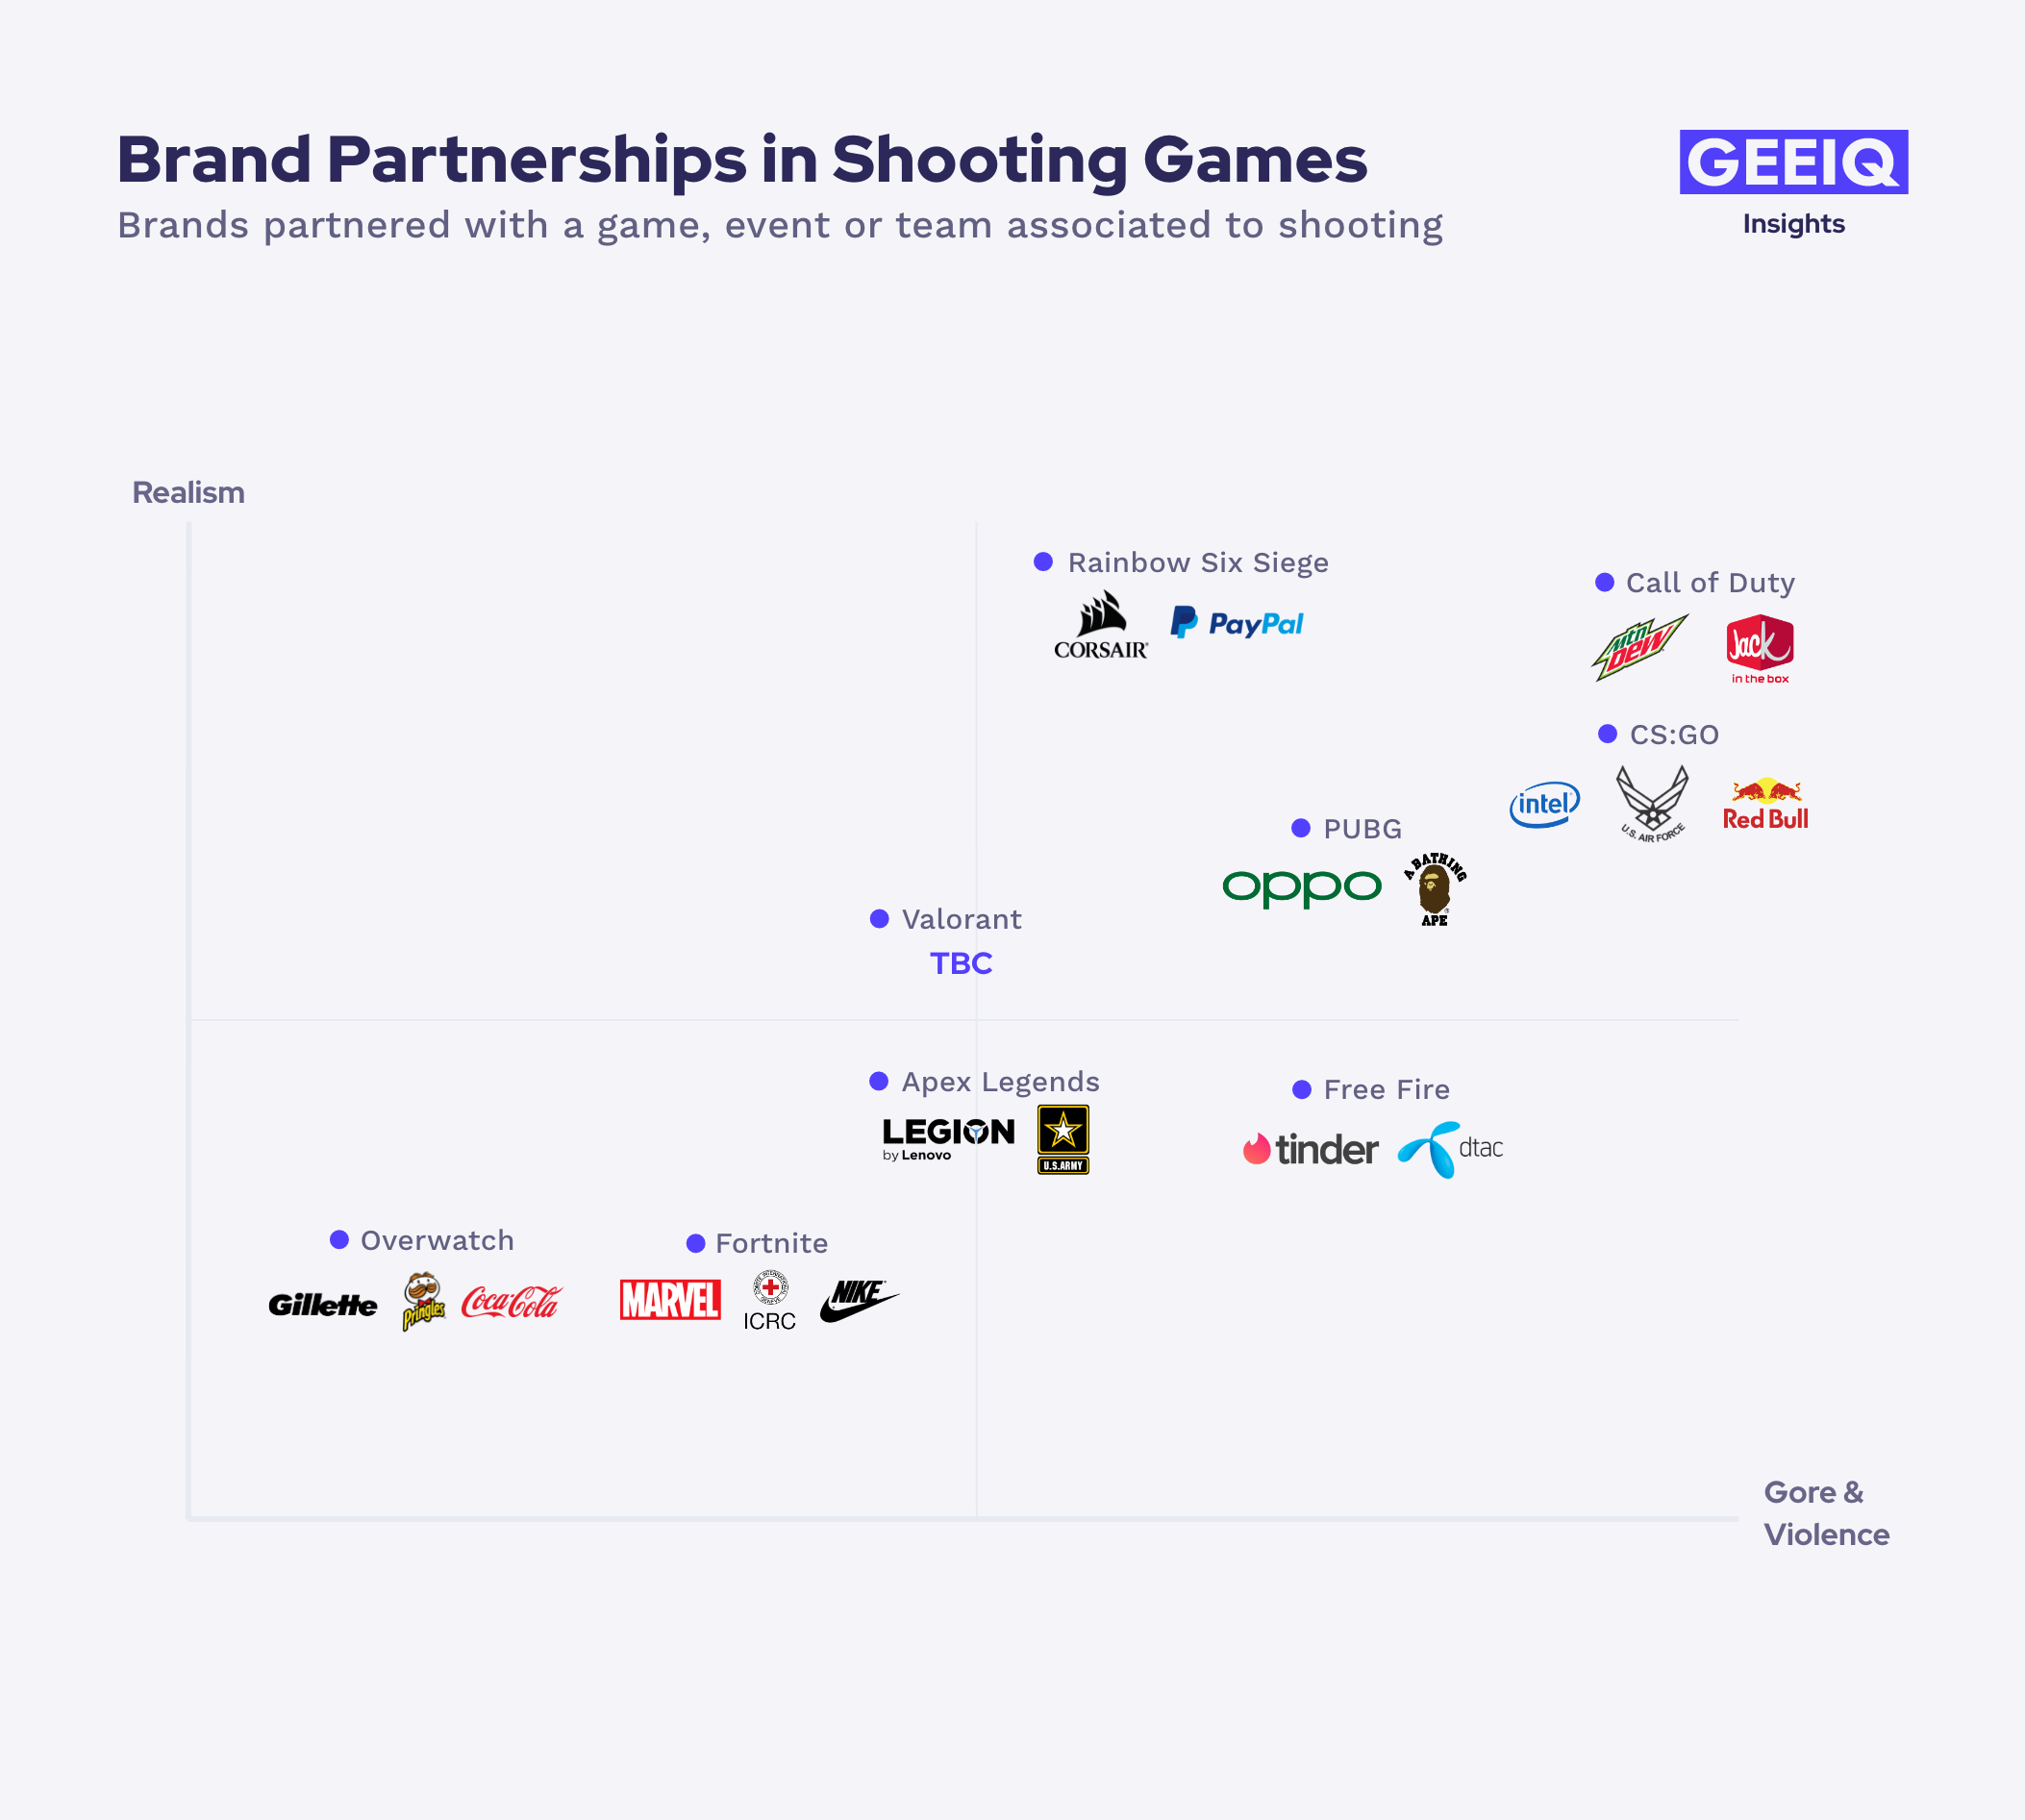 Does Violence and Realism in Shooting Games affect Brand Involvement?